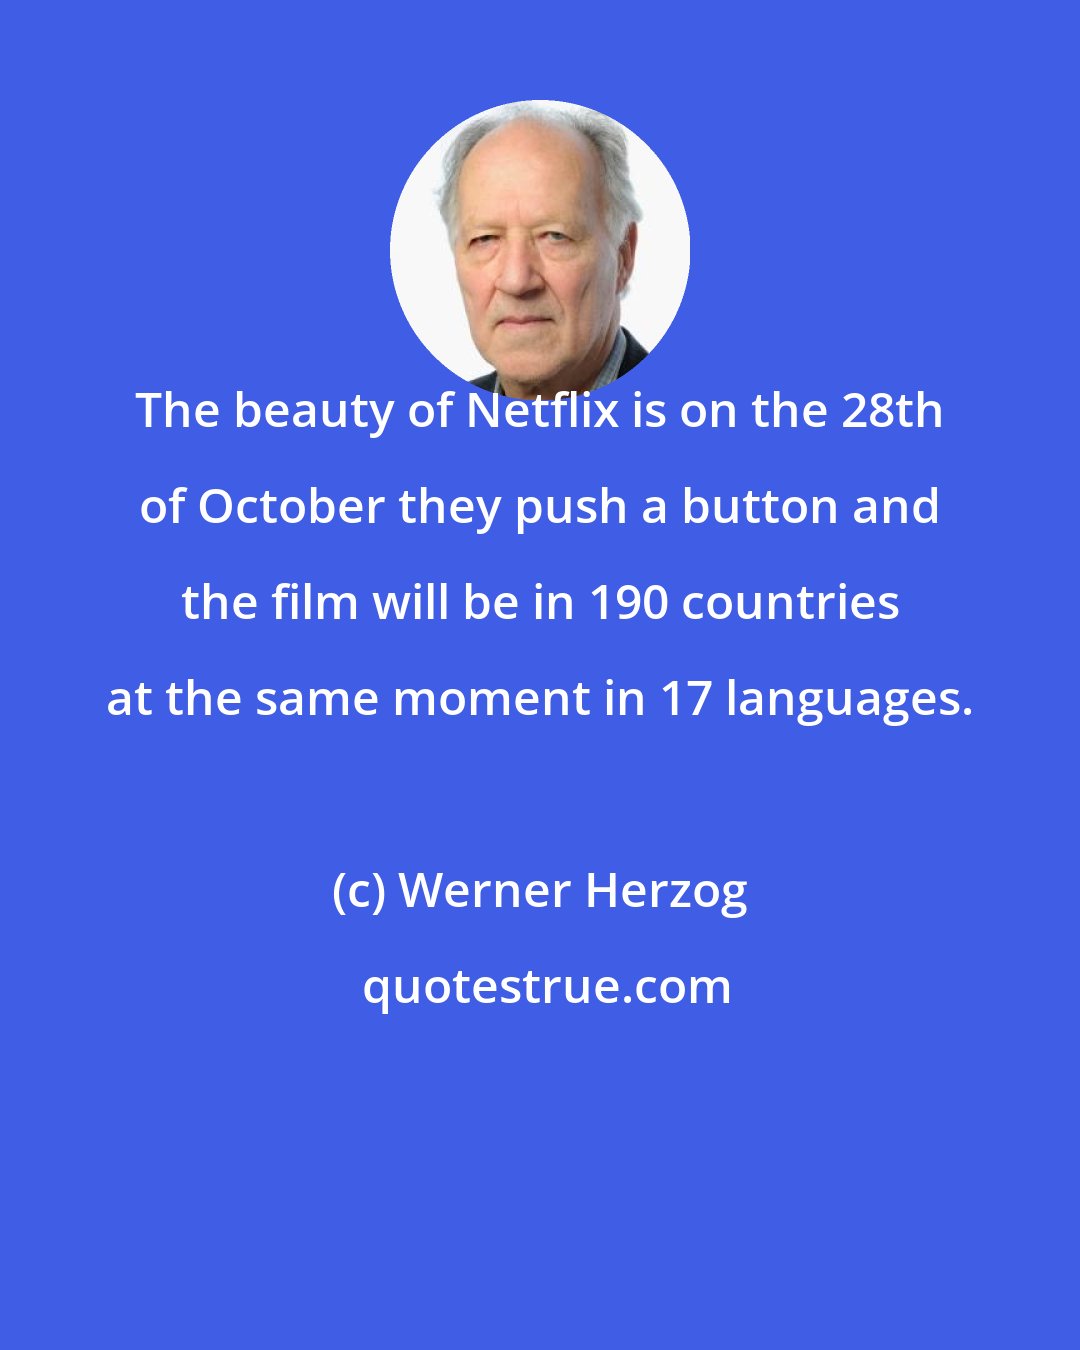 Werner Herzog: The beauty of Netflix is on the 28th of October they push a button and the film will be in 190 countries at the same moment in 17 languages.